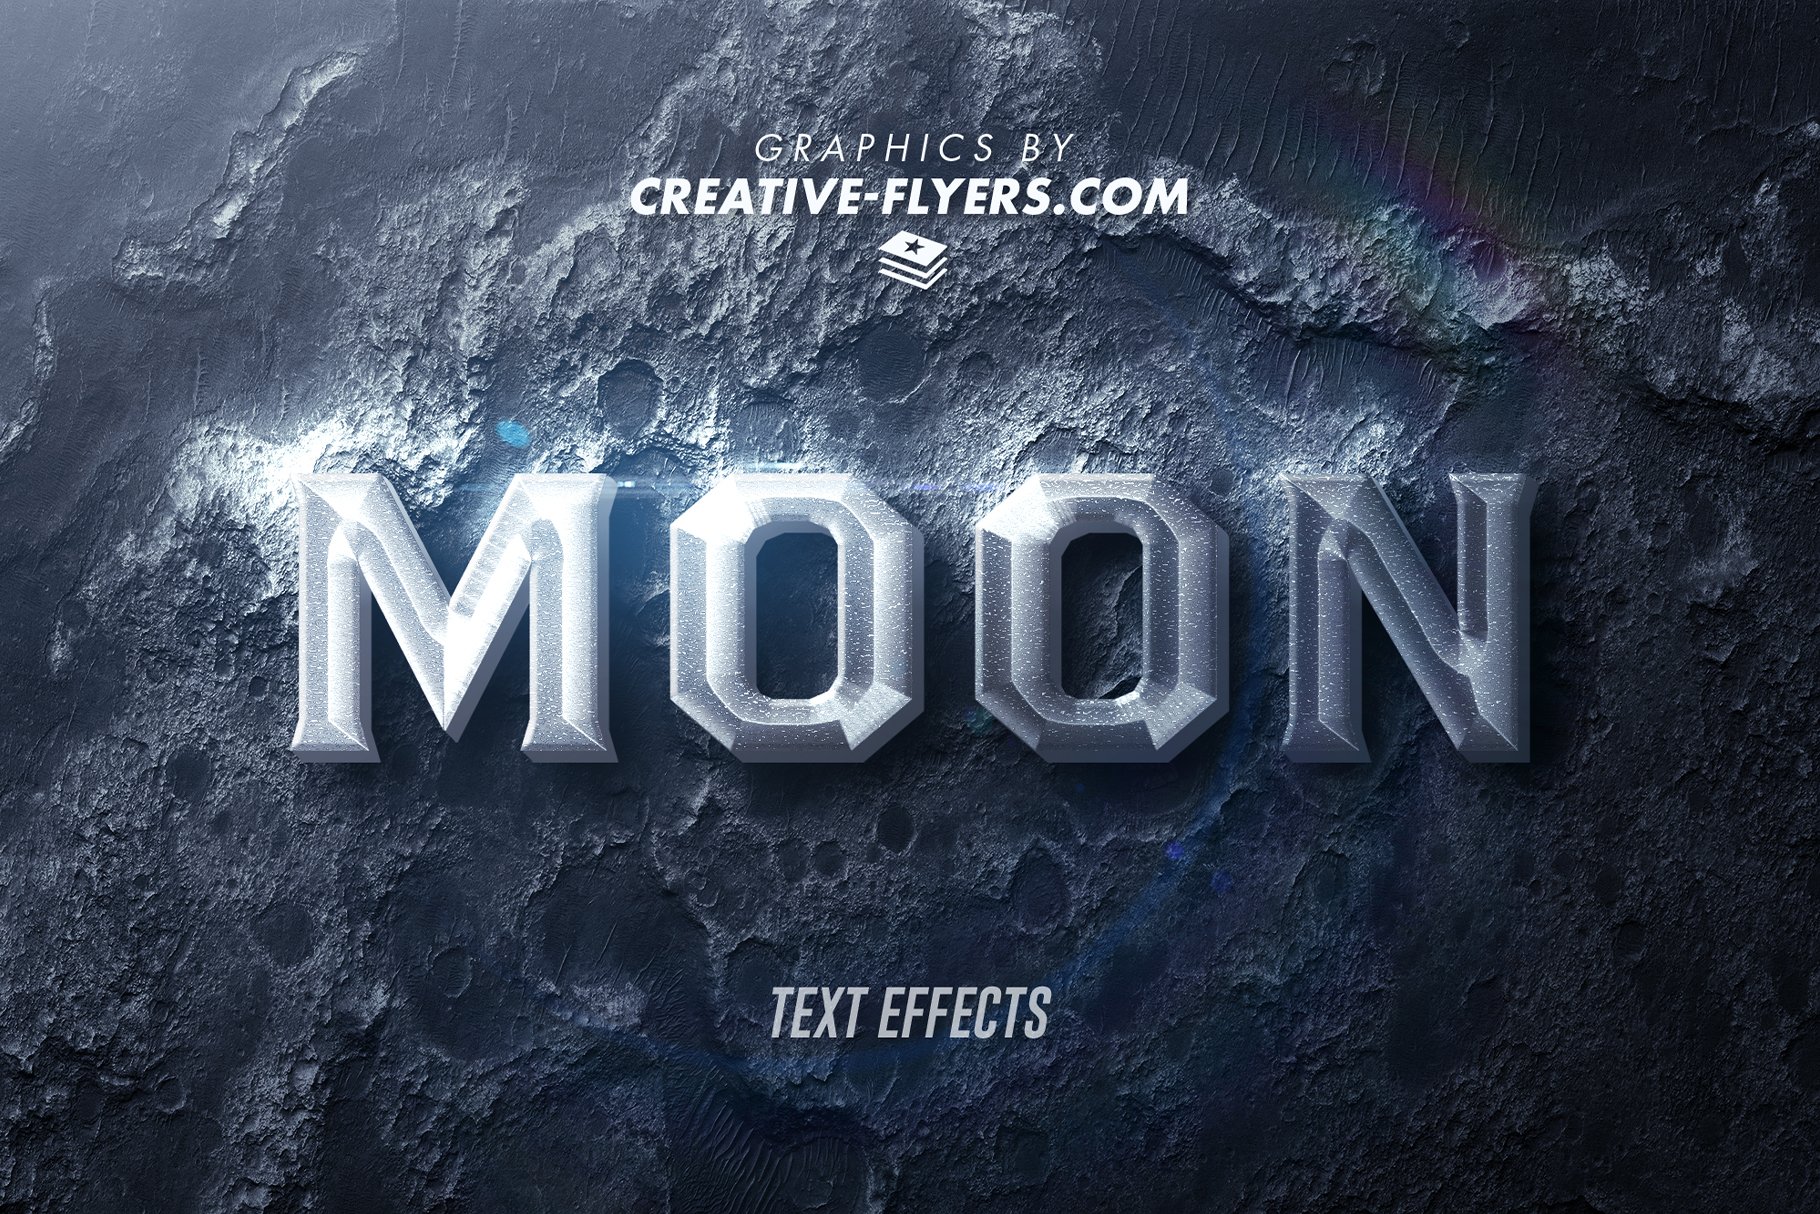 Photoshop Text Effects (Moonscape)cover image.